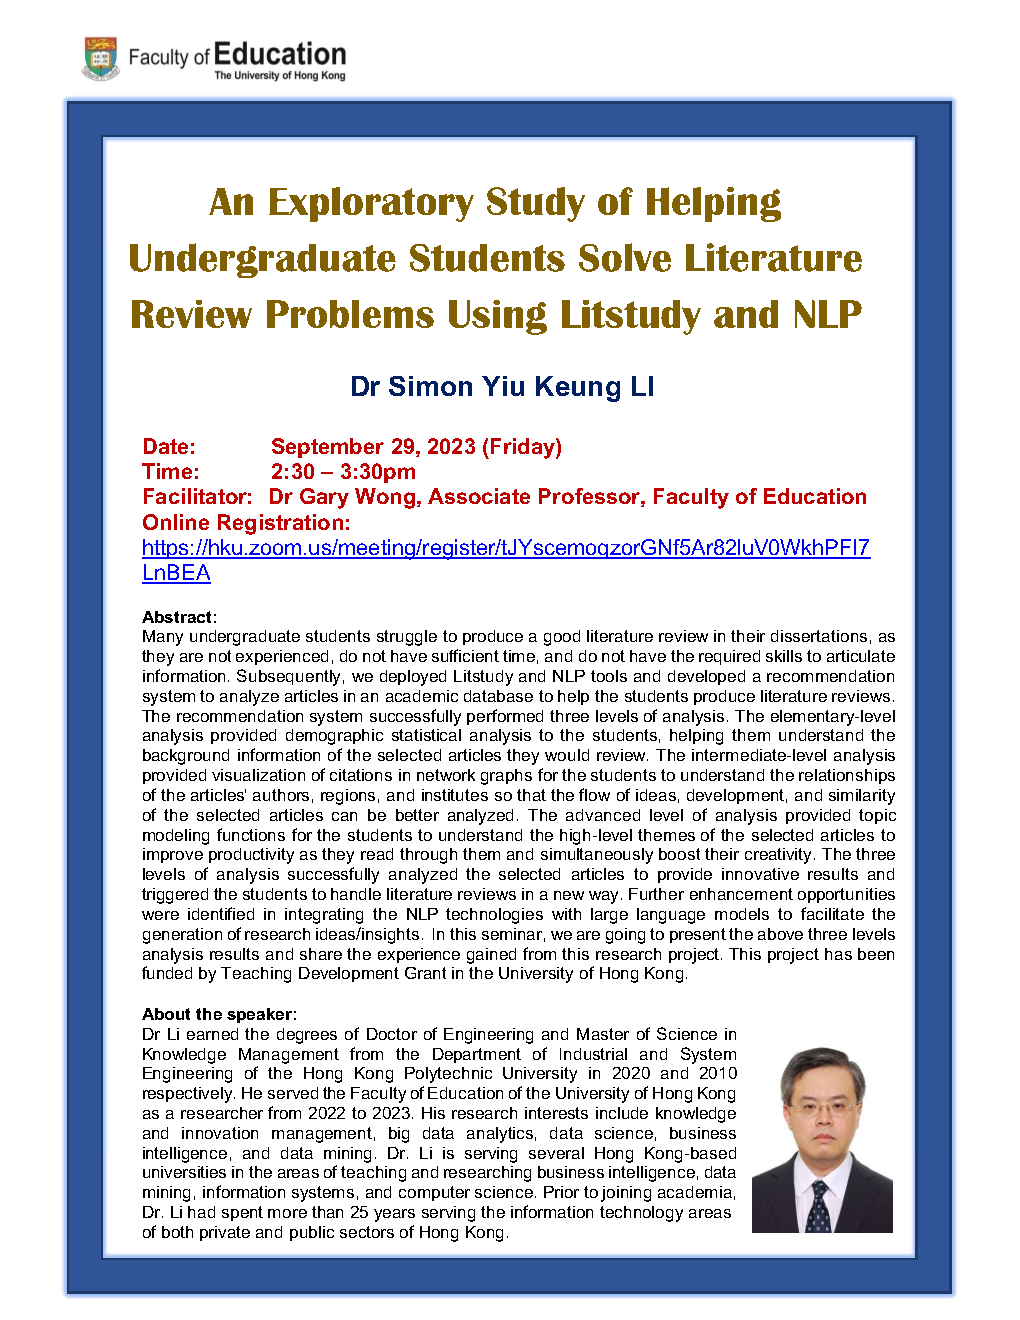 Zoom Seminar: An Exploratory Study of Helping Undergraduate Students Solve Literature Review Problems Using Litstudy and NLP